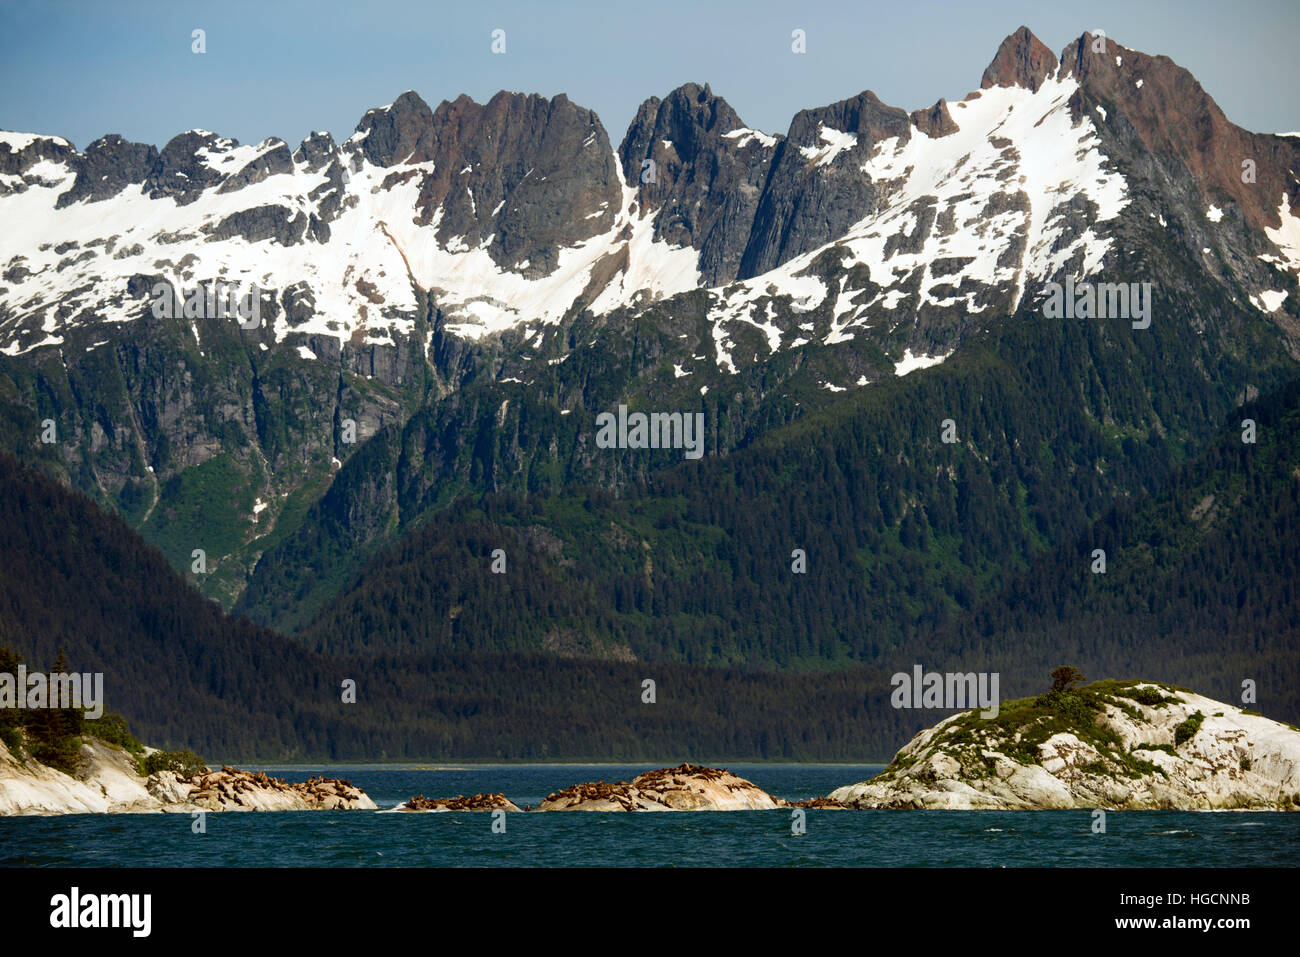 A colony of Steller Sea Lions (Eumetopias jubatus) on South Marble Island in Glacier Bay National Park, Alaska. USA. Northern (Steller) sea lions (Eum Stock Photo